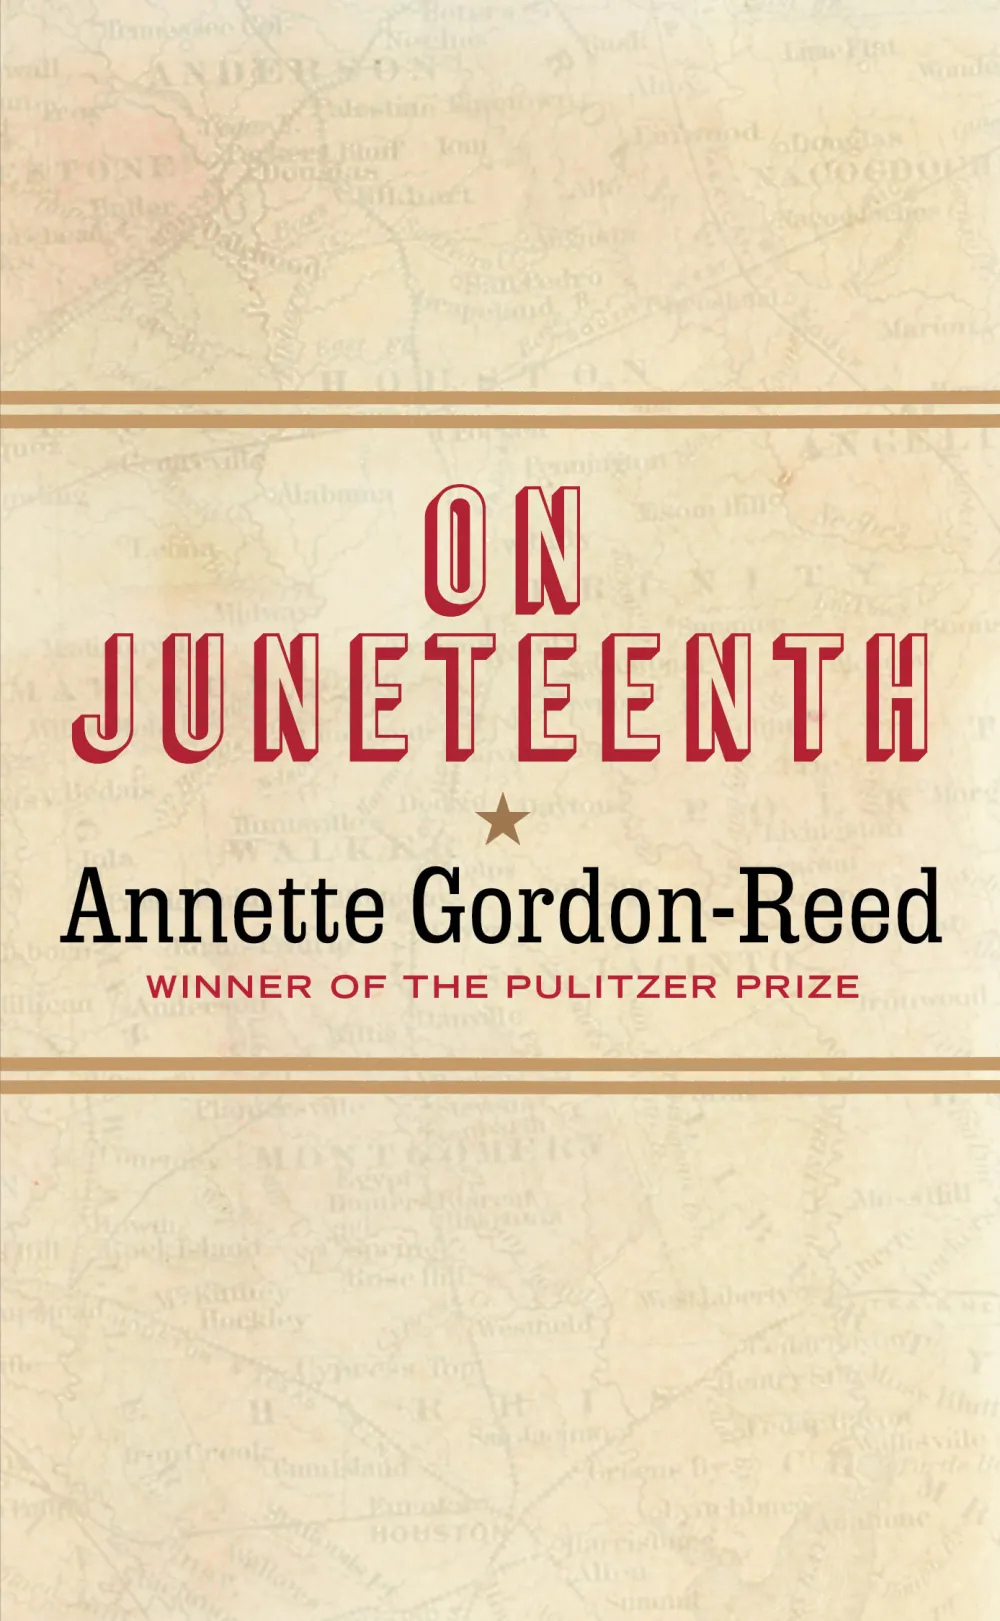 On Juneteenth by Annette Gordon-Reed Book Cover